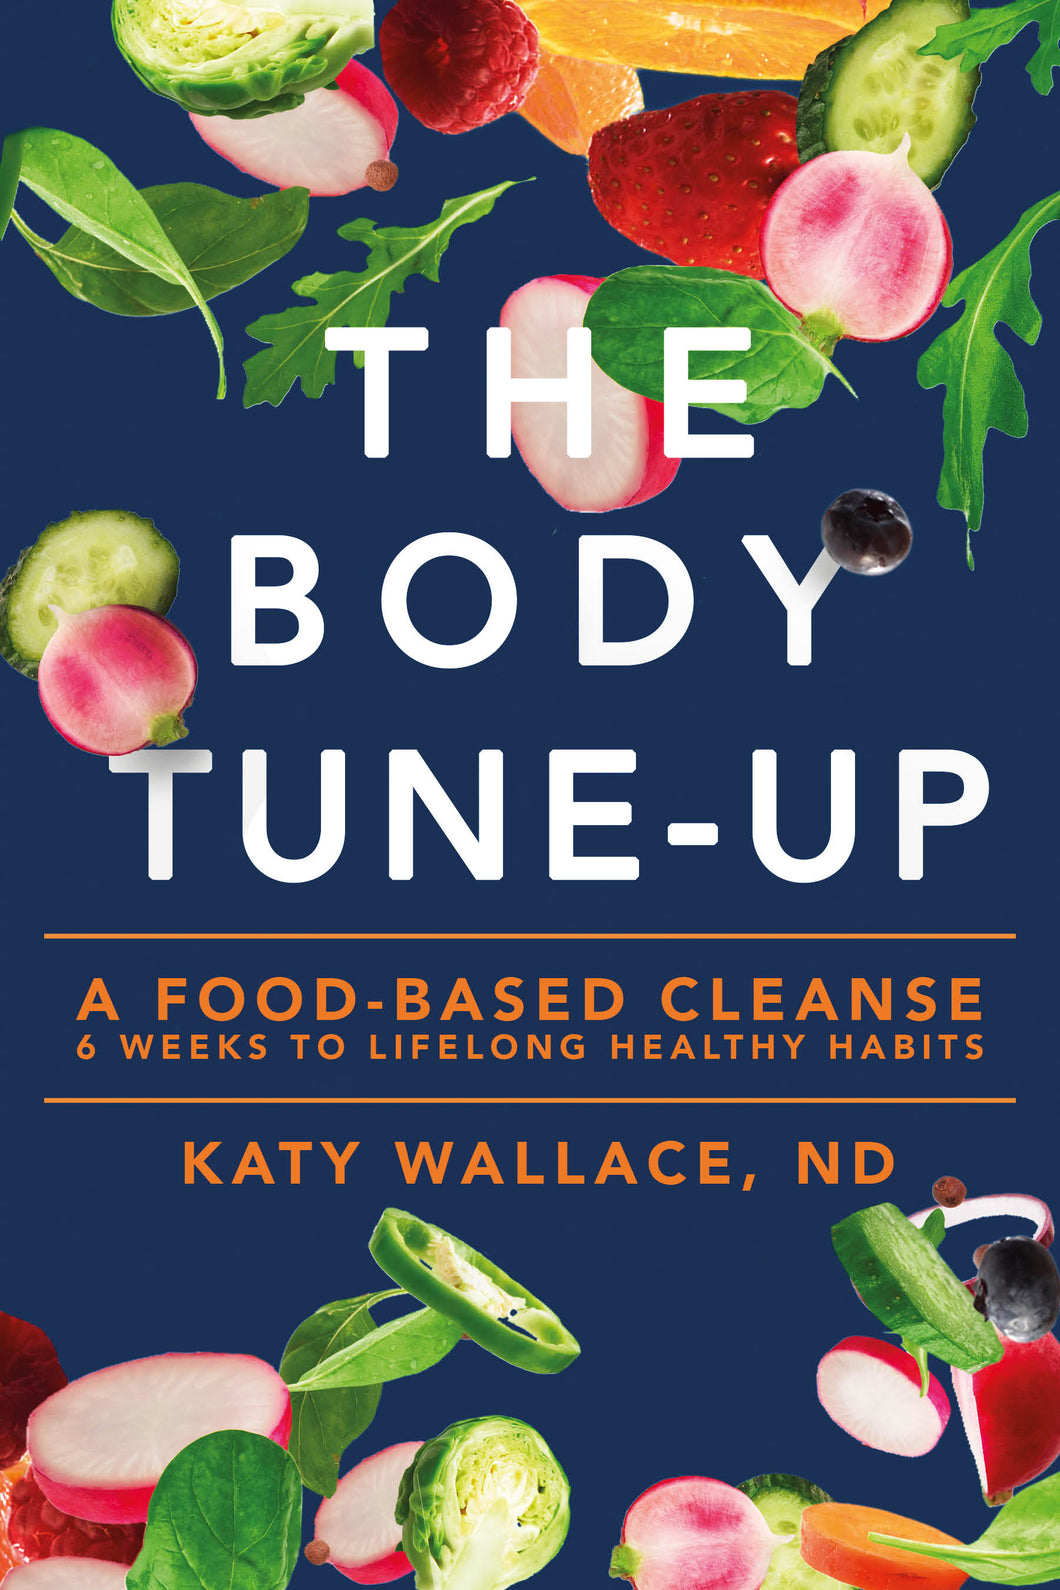 Body Tune-up: A food-based cleanse by Katy Wallace, ND Paperback